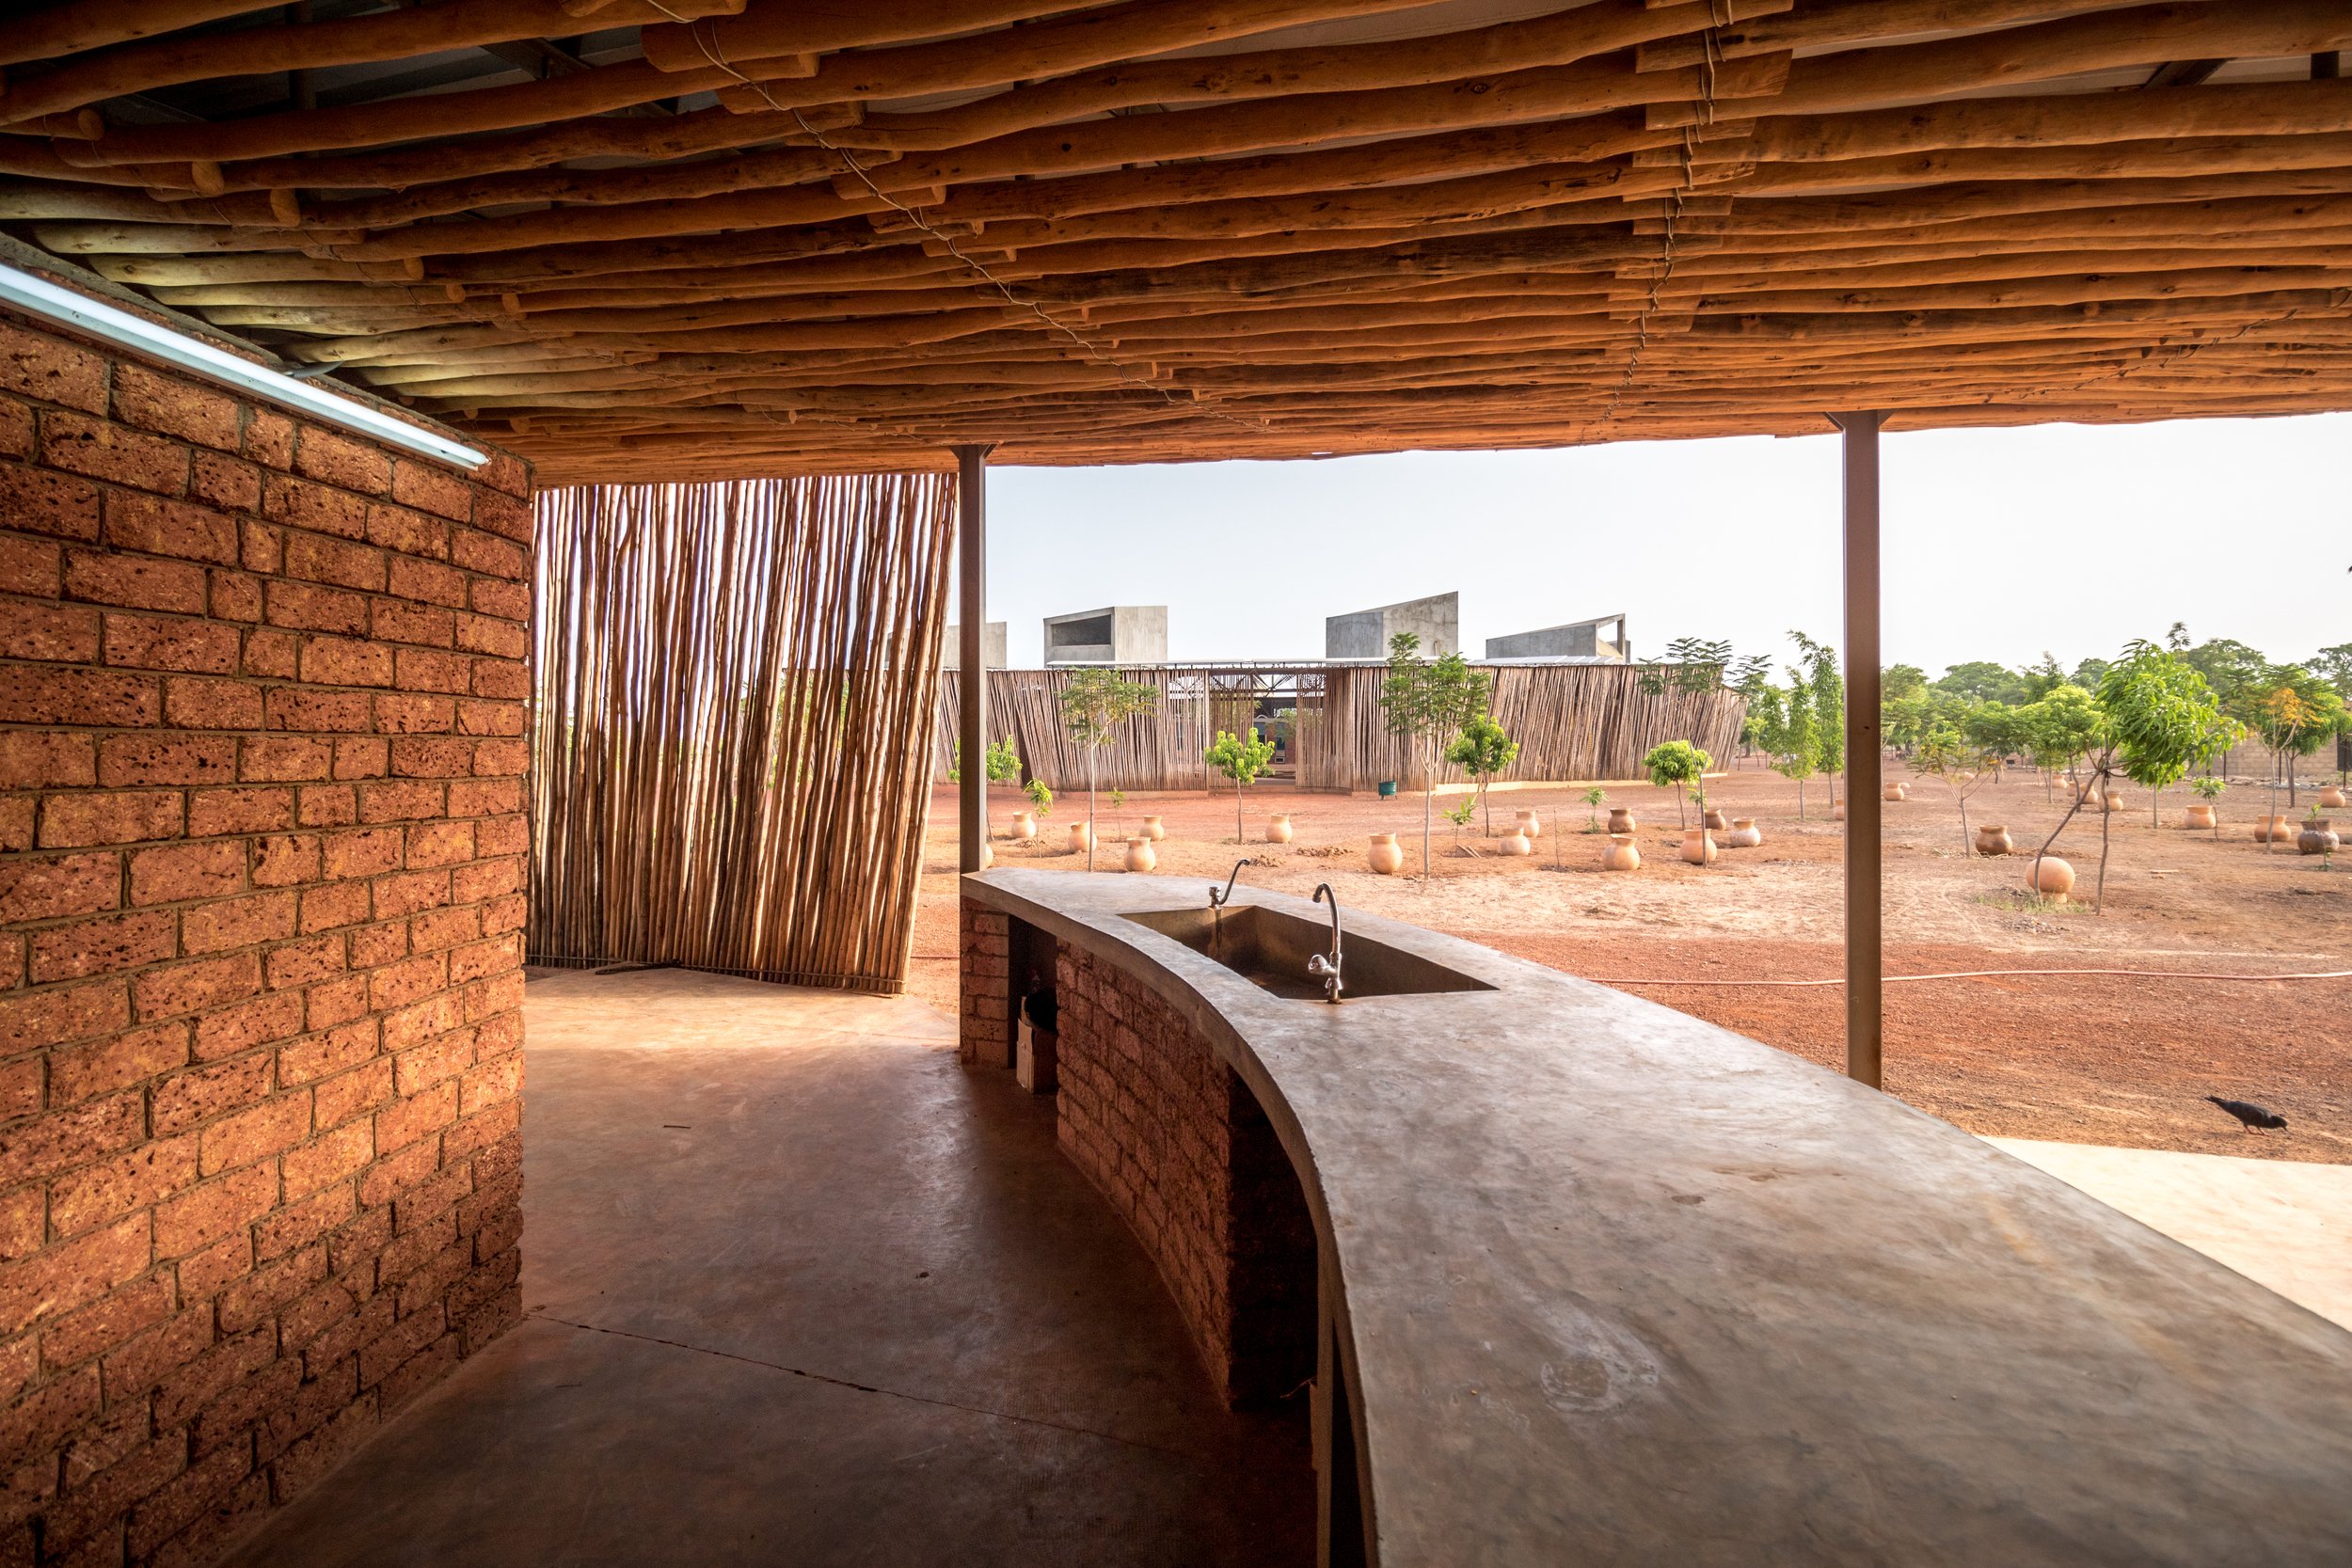 079_Lycée Schorge_kitchen_image by Andrea Maretto for Kéré Architecture.jpg